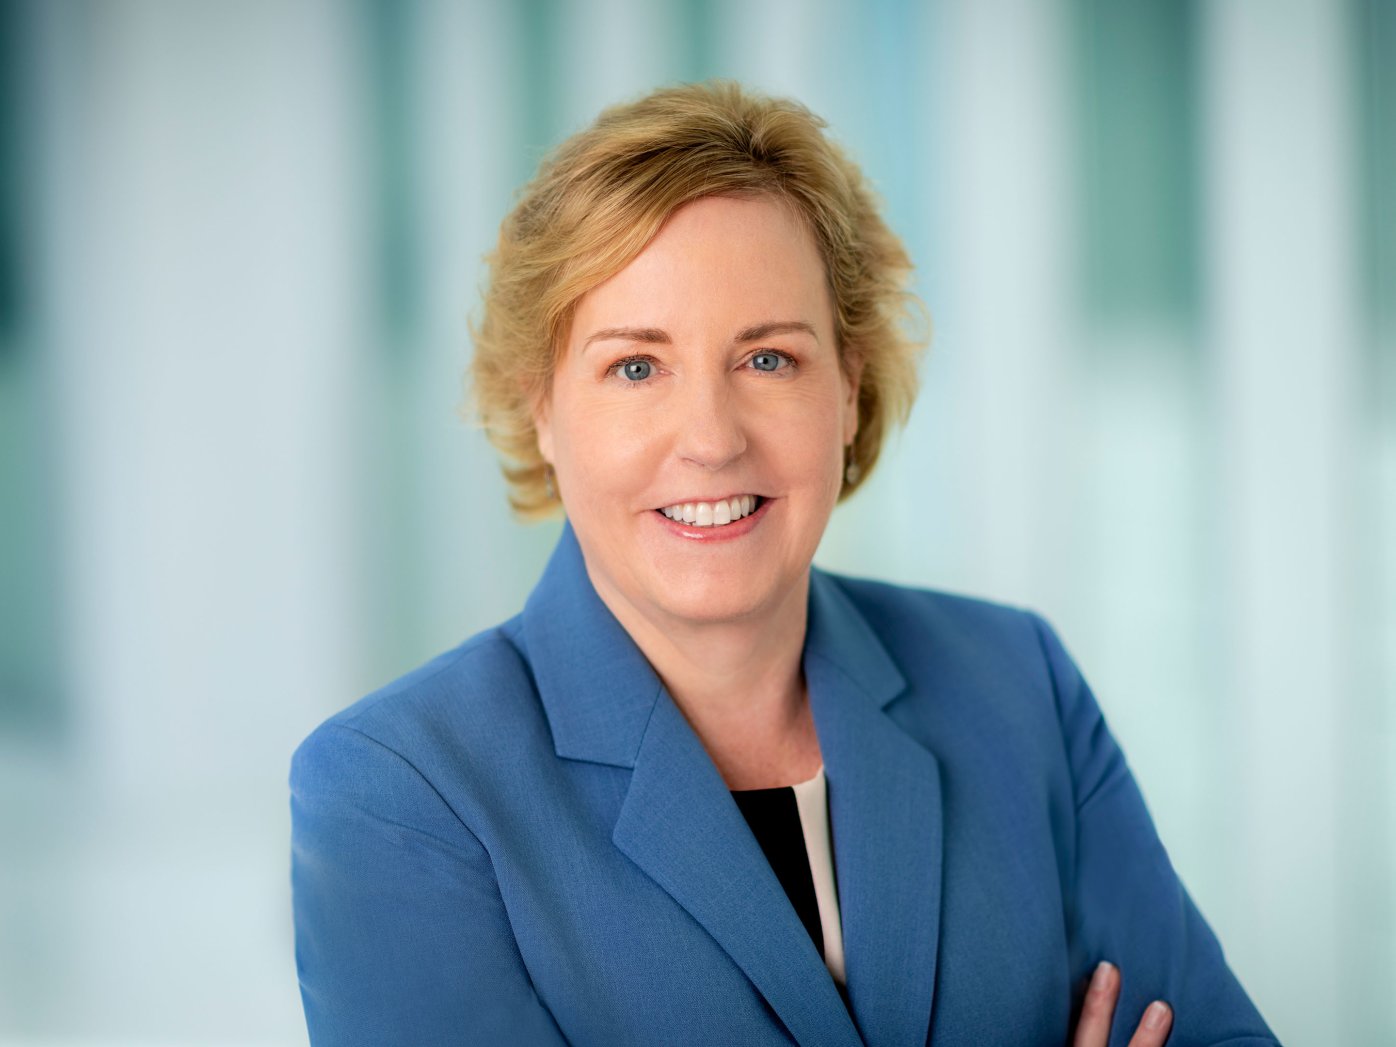 Susan Green is executive vice president and chief financial officer for Sharp HealthCare.